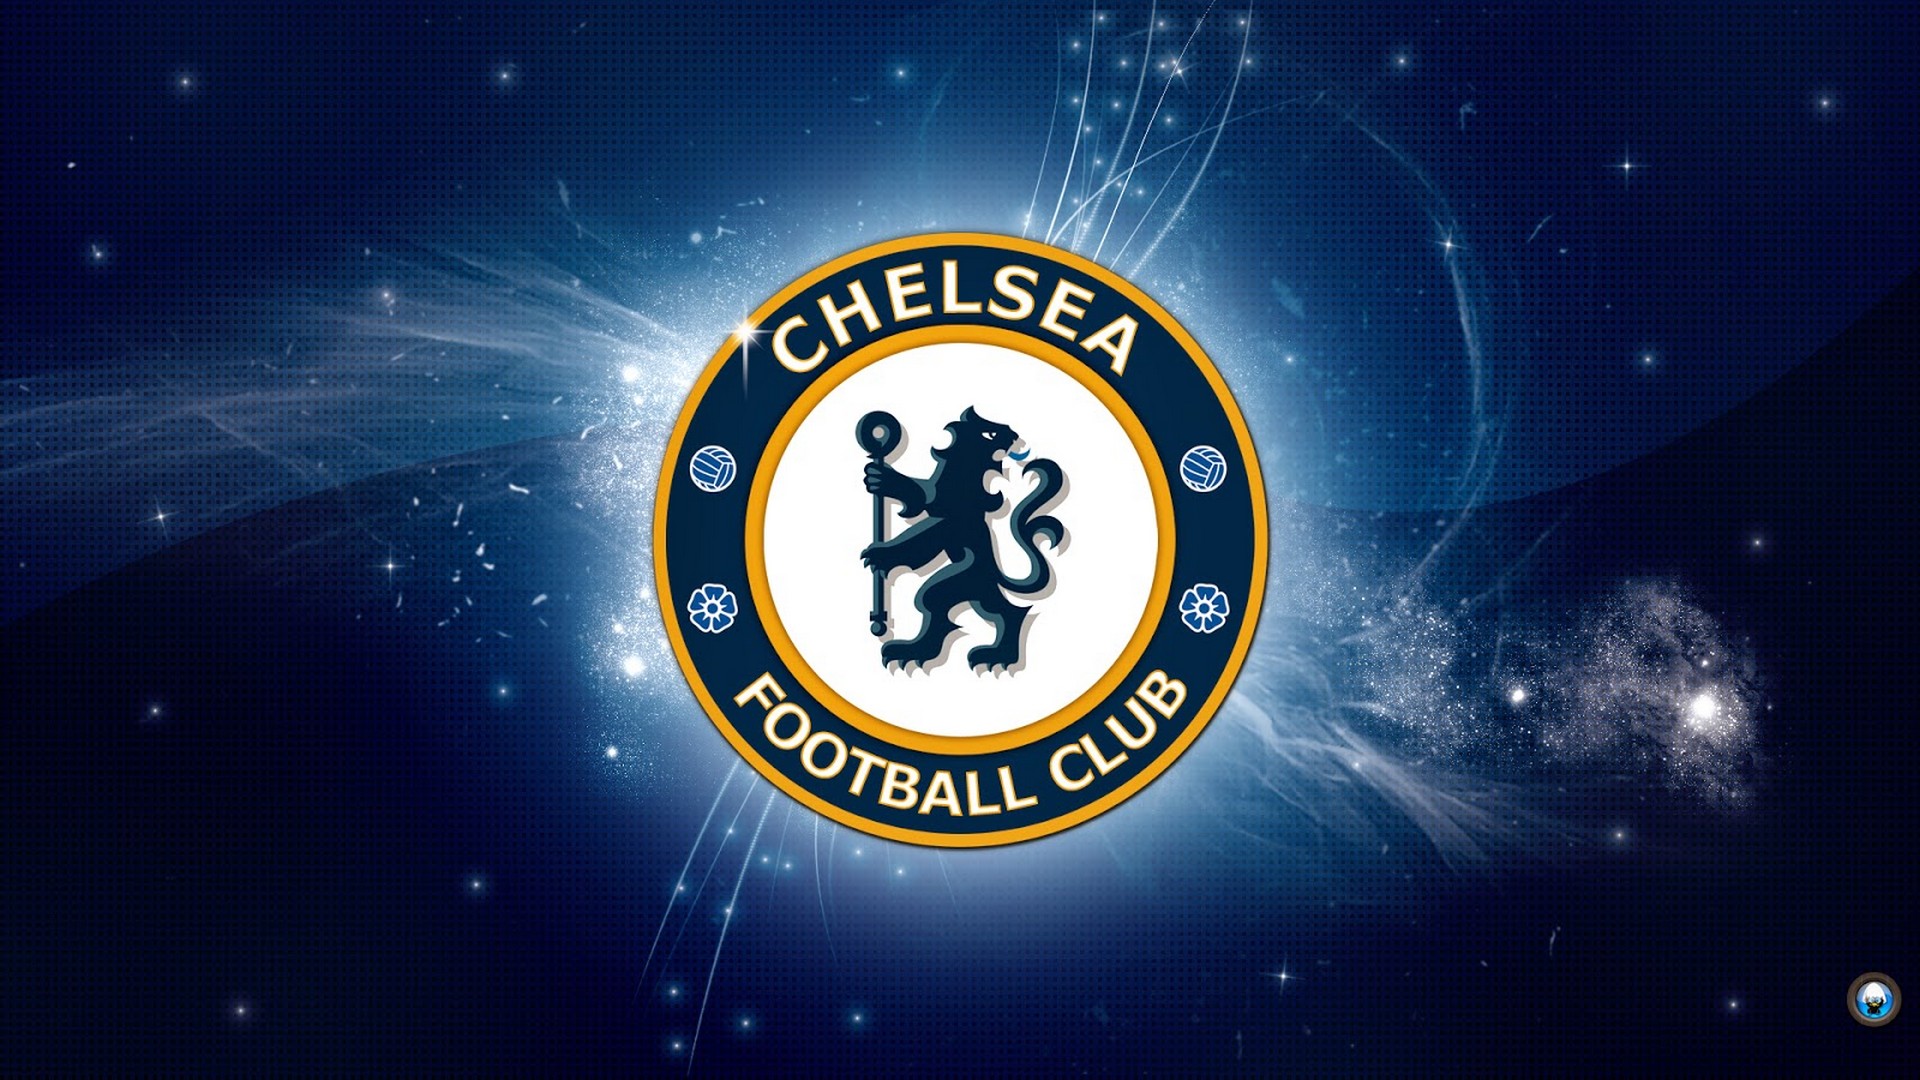 Wallpaper Desktop Chelsea Football HD with resolution 1920x1080 pixel. You can make this wallpaper for your Mac or Windows Desktop Background, iPhone, Android or Tablet and another Smartphone device